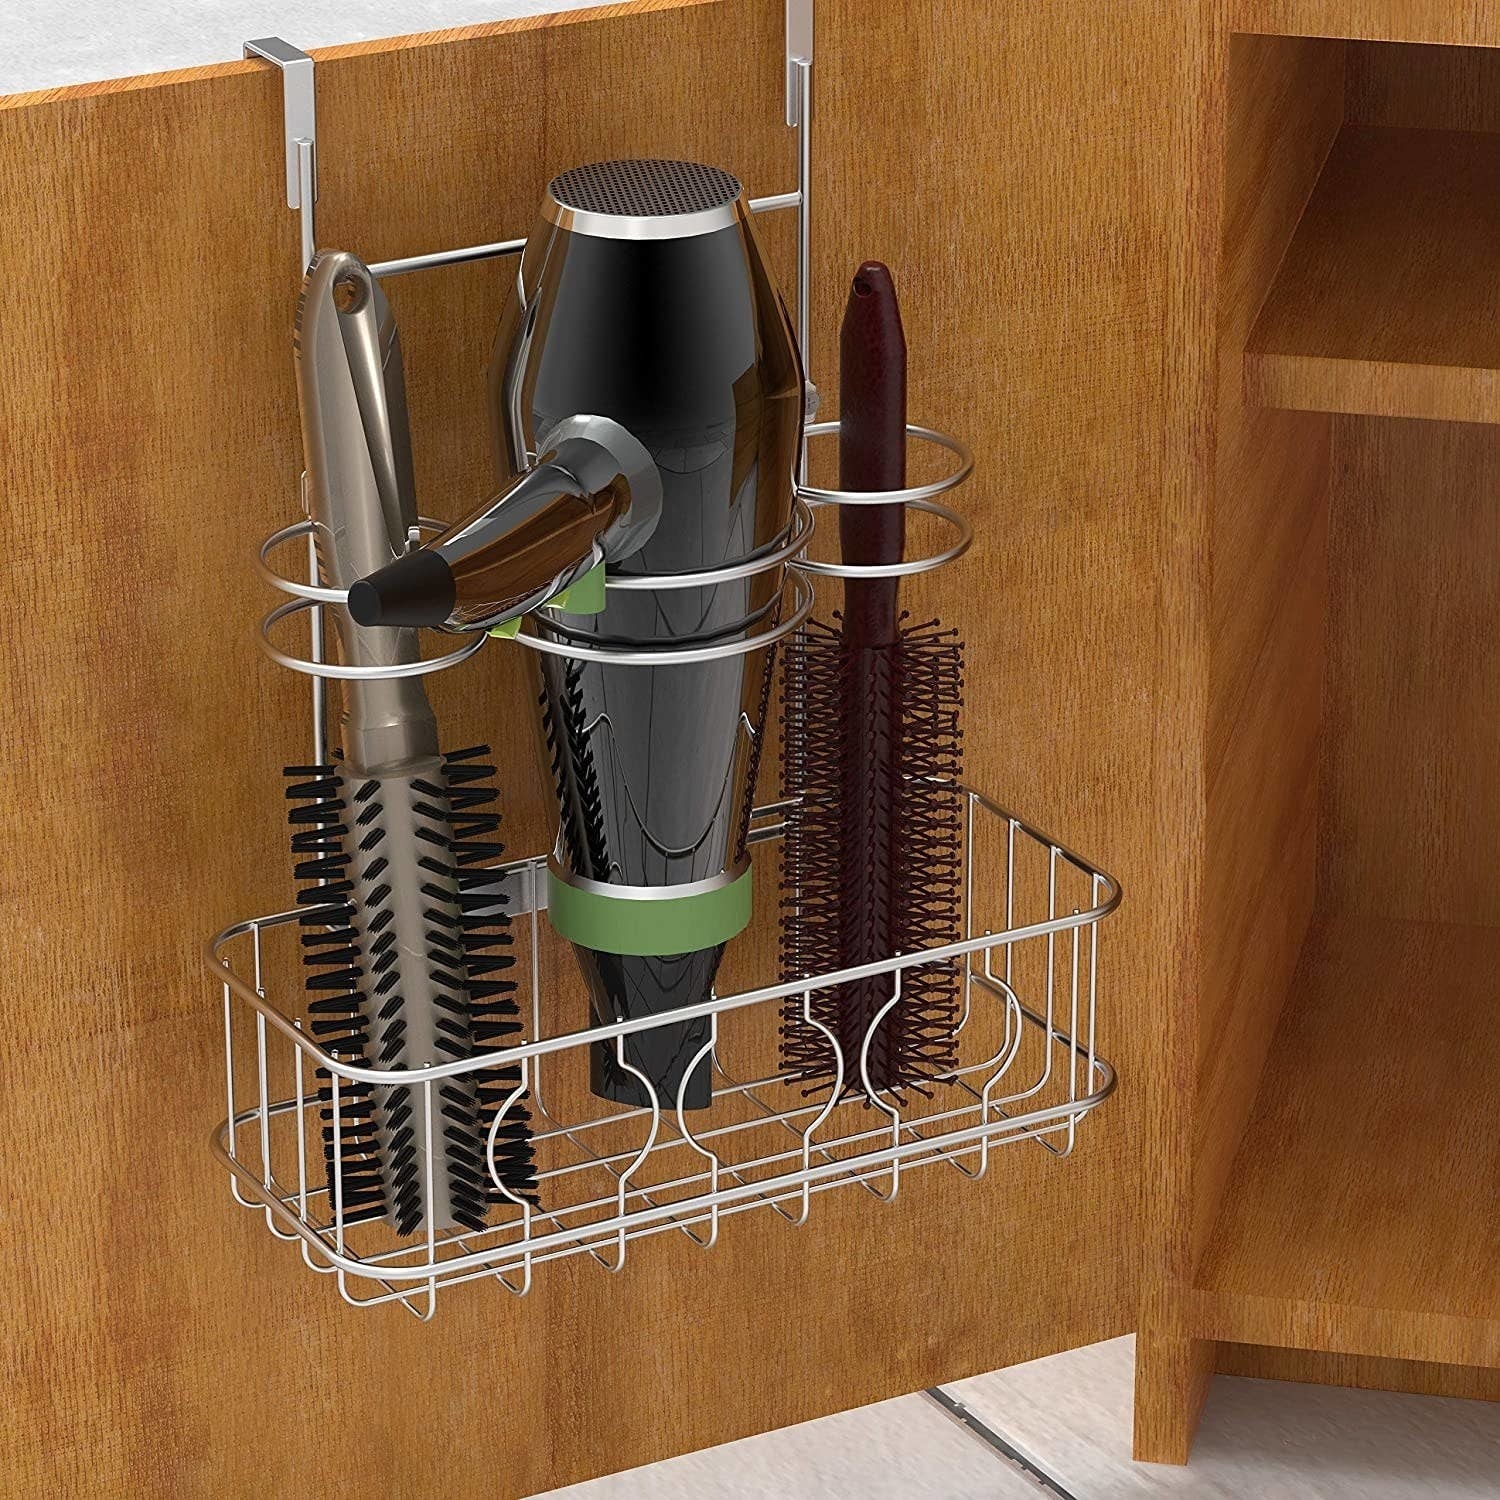 hot hair tools in the over-cabinet basket